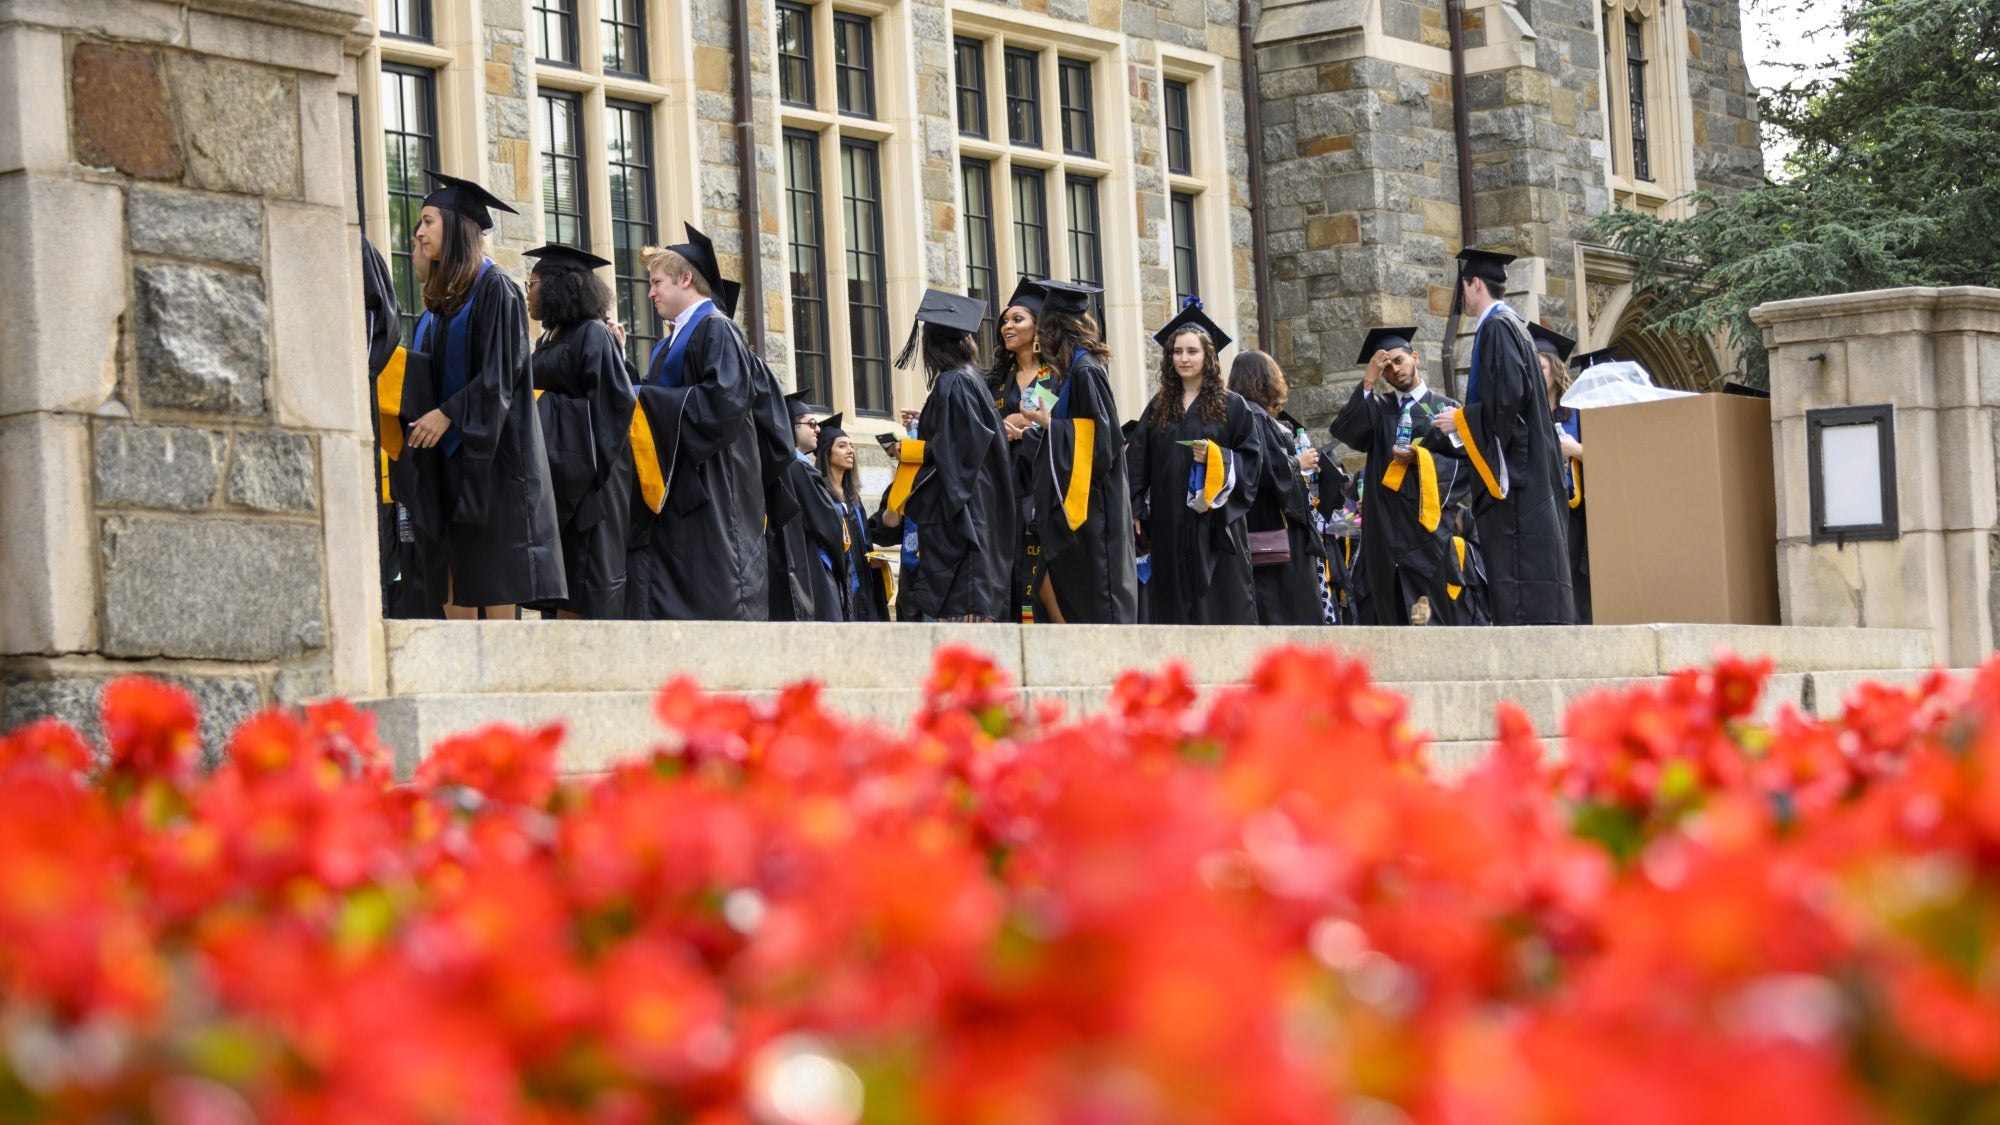 Sudents wearing black graduation robes line up for the Commencement Ceremony at Georgetown University in May with orange flowers in the foreground